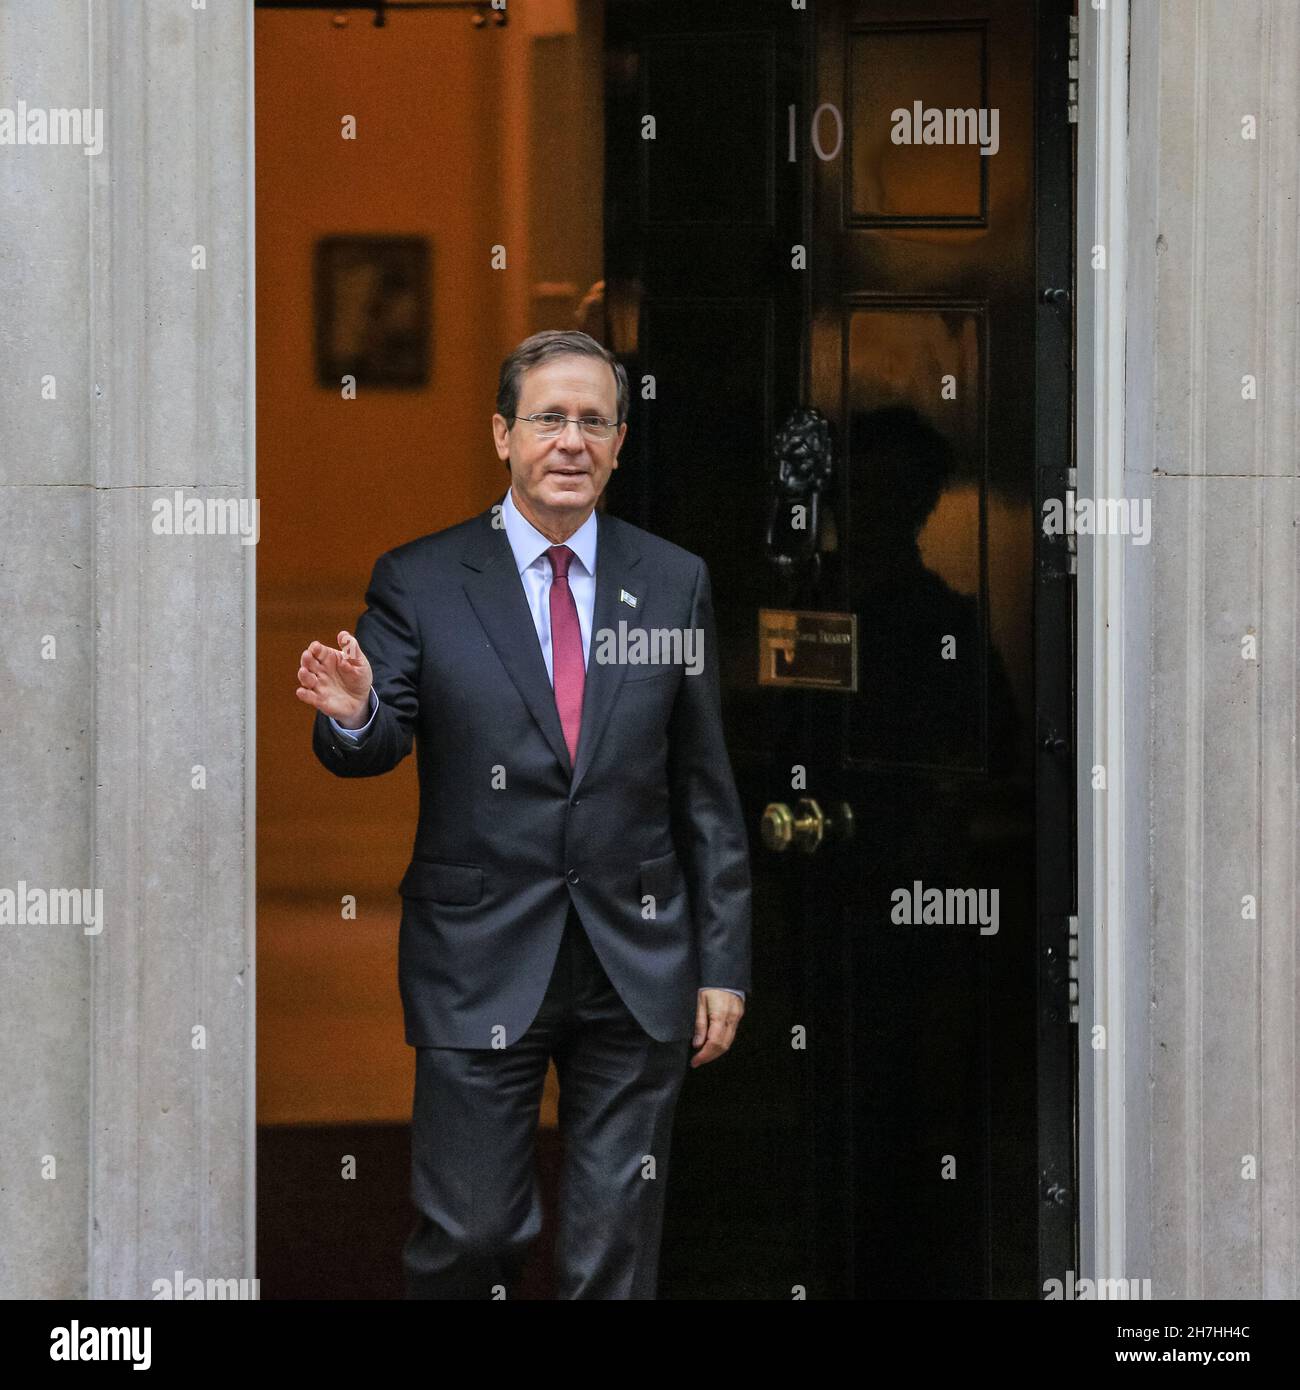 Downing Street, London, UK. 23rd Nov, 2021. Isaac Herzog pictured. Isaac Herzog, President of Israel, meets British Prime Minister Boris Johnson in Downing Street, London today. Credit: Imageplotter/Alamy Live News Stock Photo